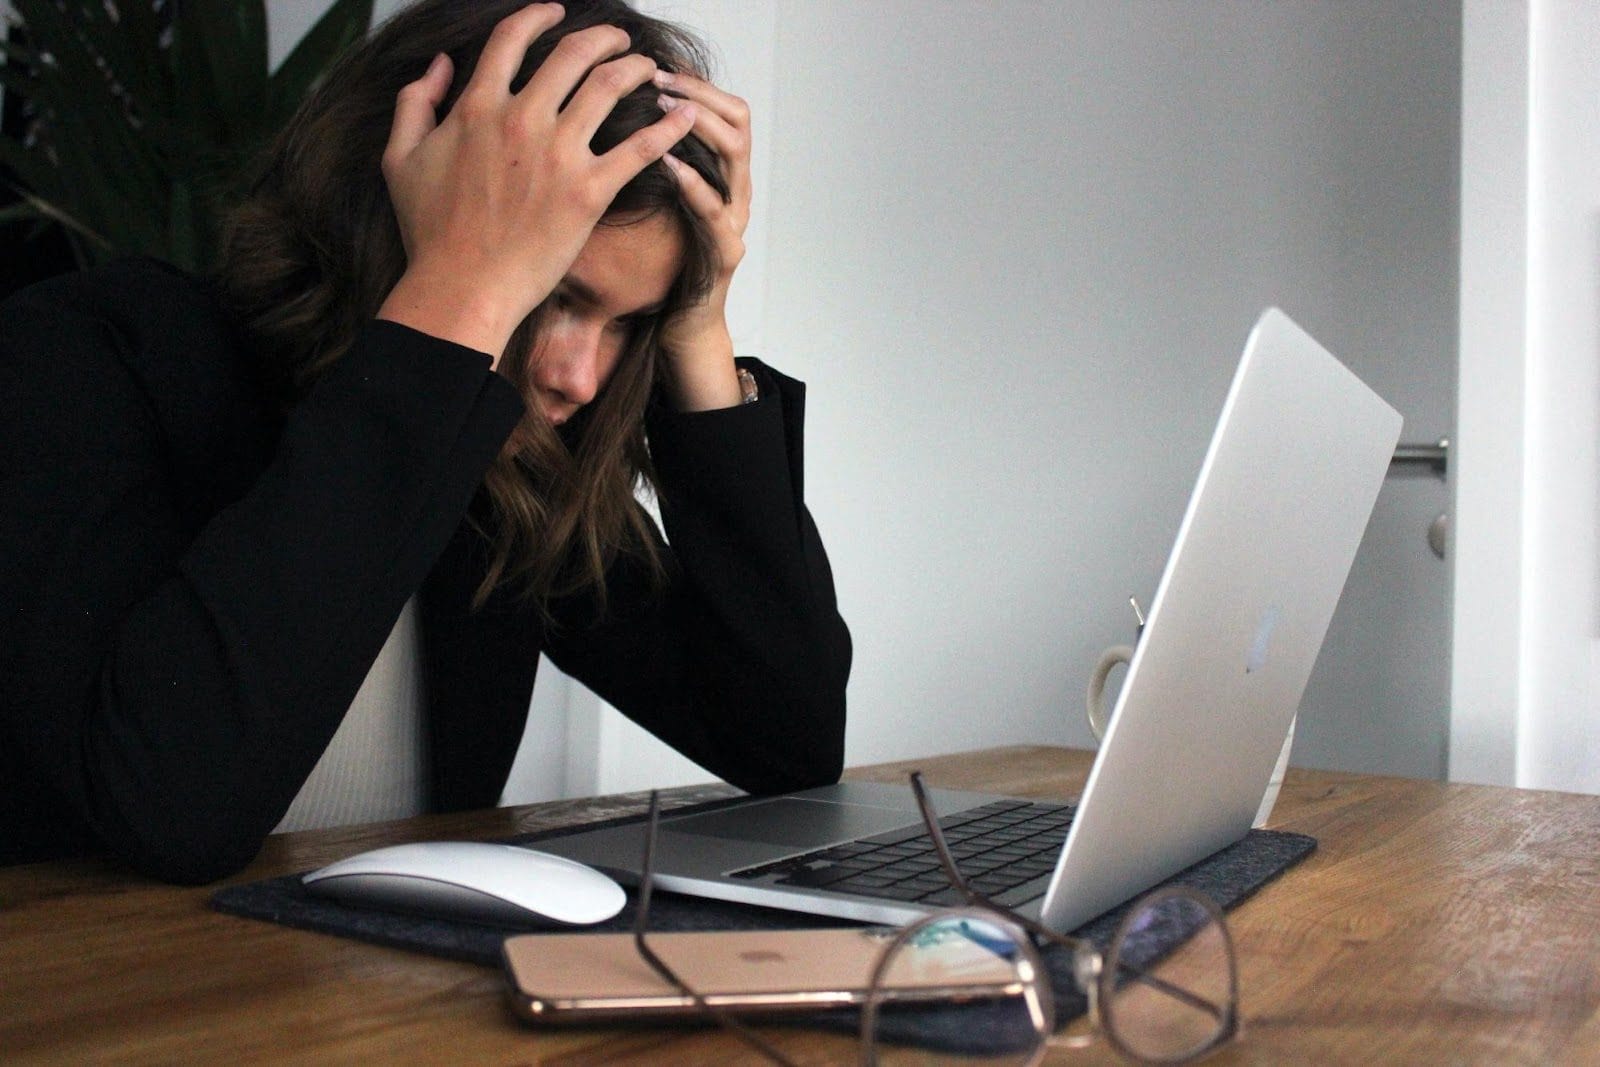 Woman grabbing her head in her hands looking distraught as she stares into her laptop